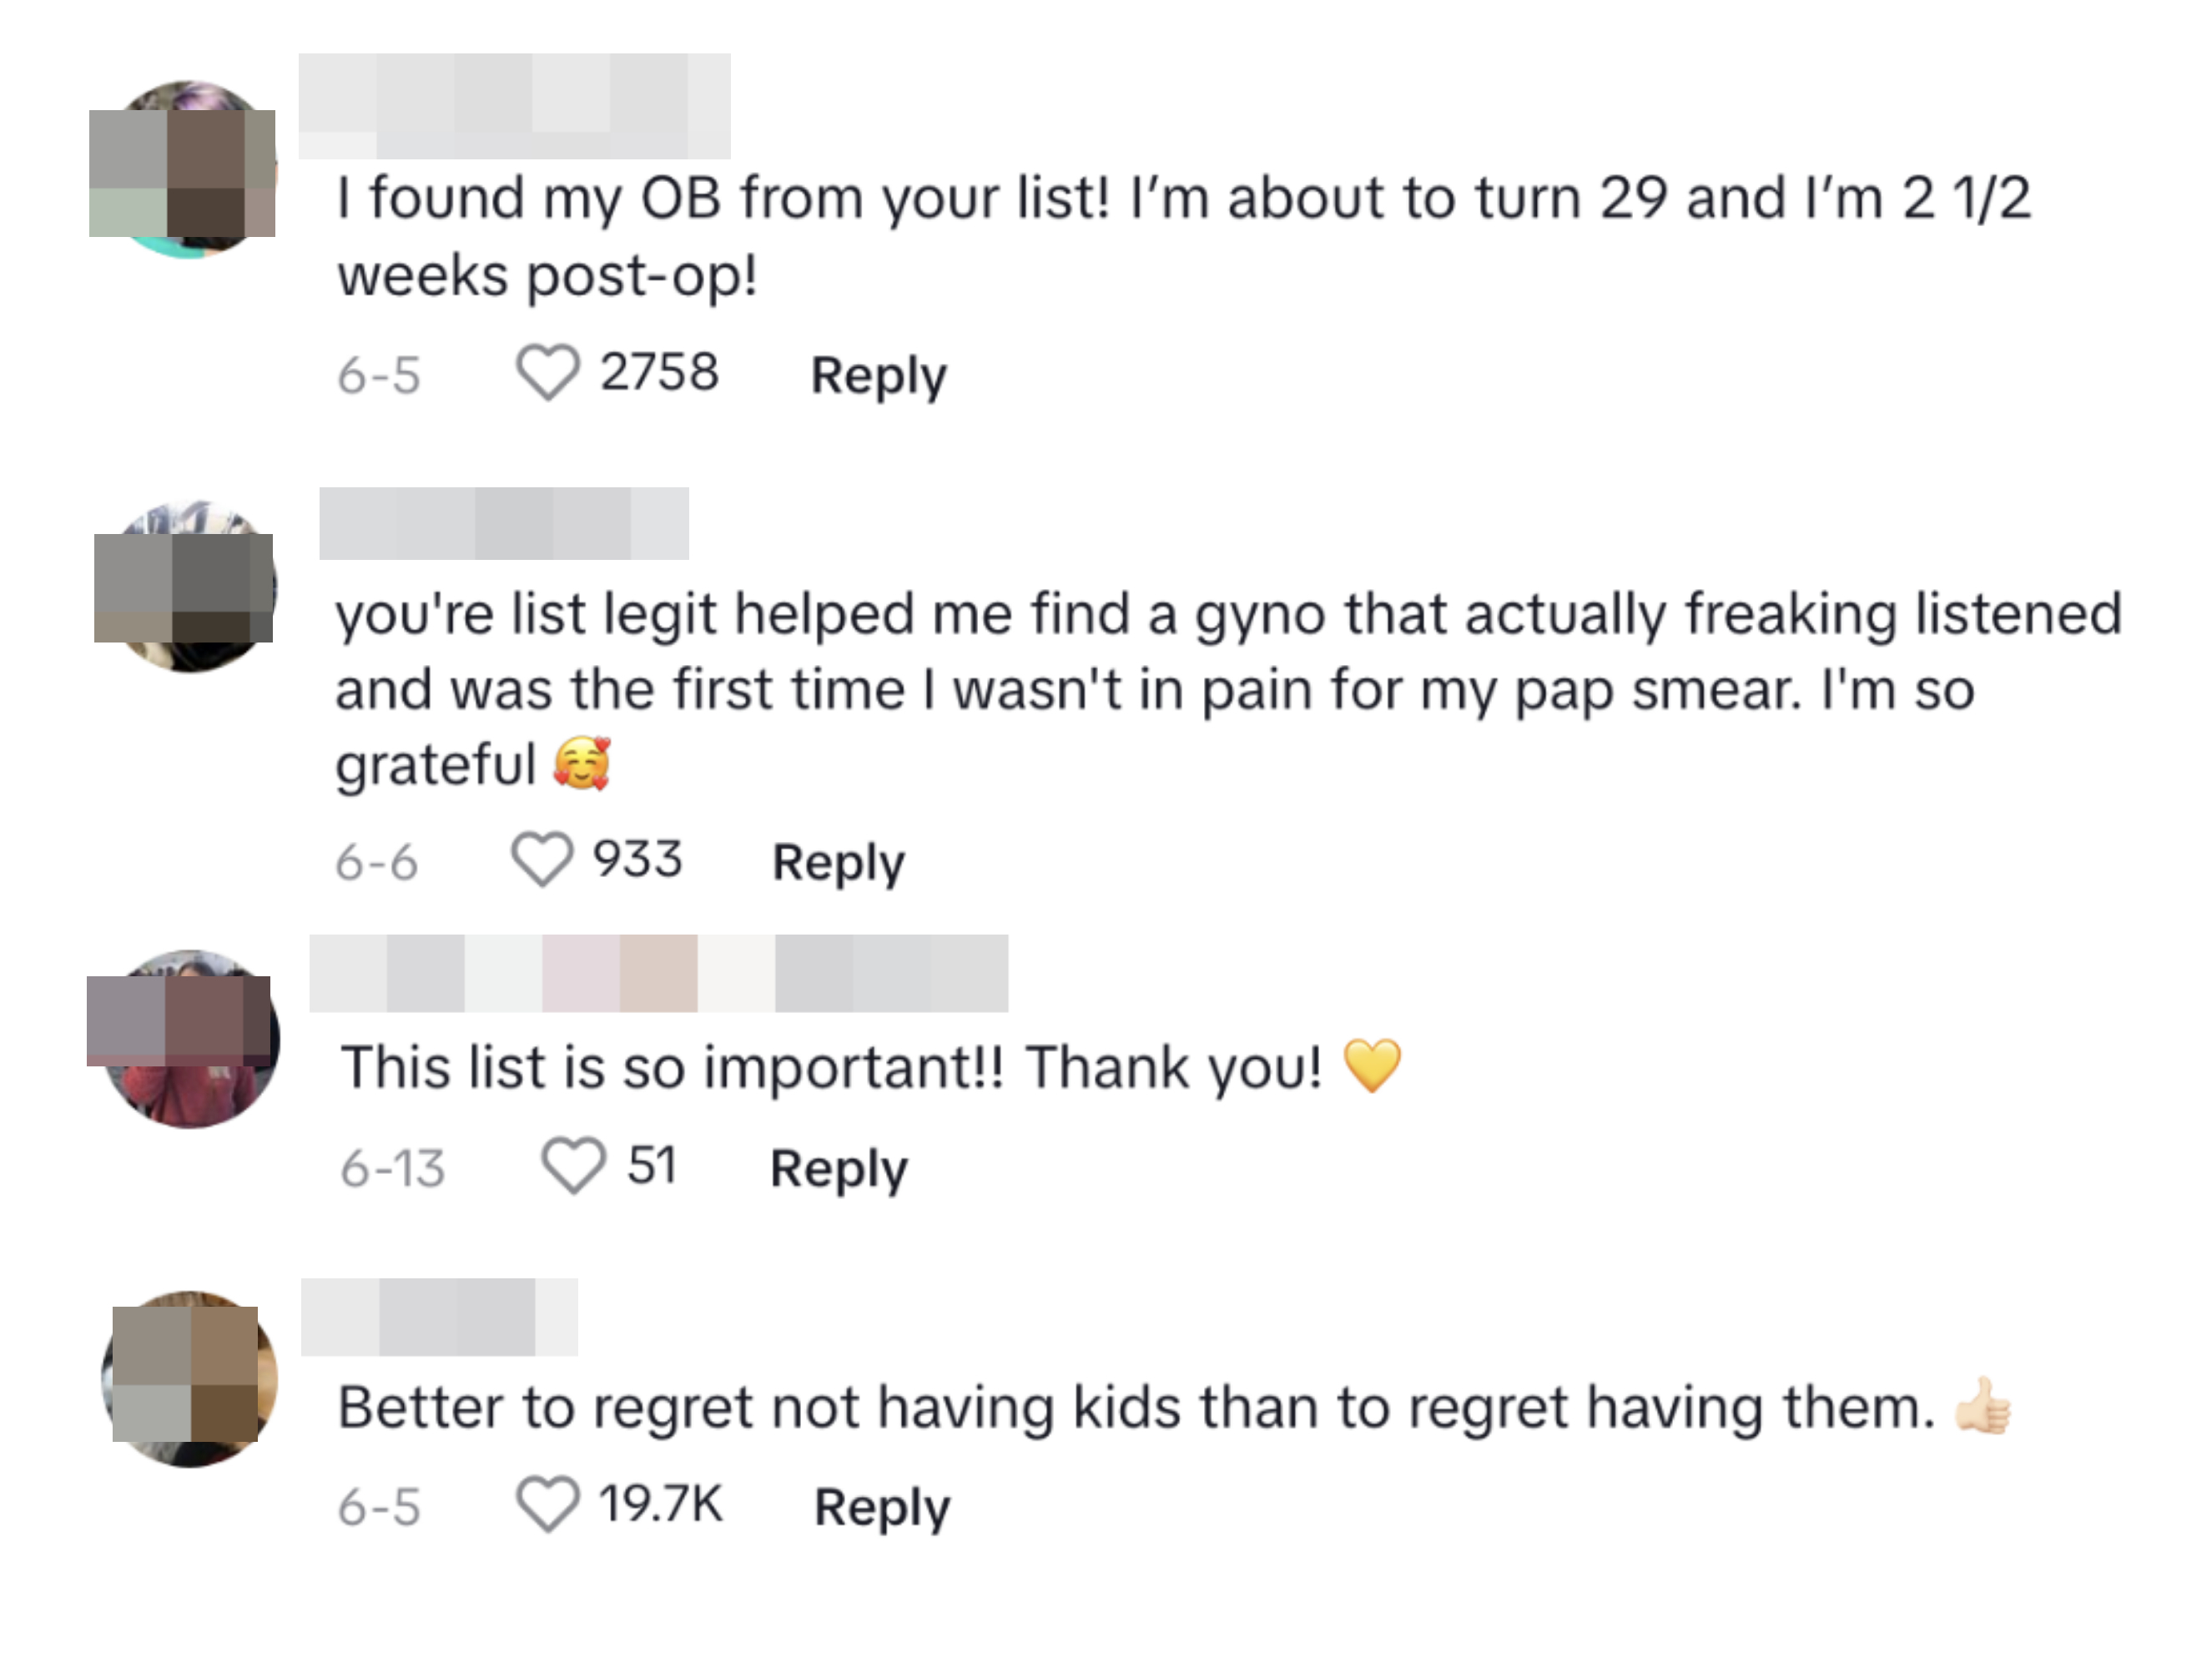 People thanking Dr. Fran in the comments section